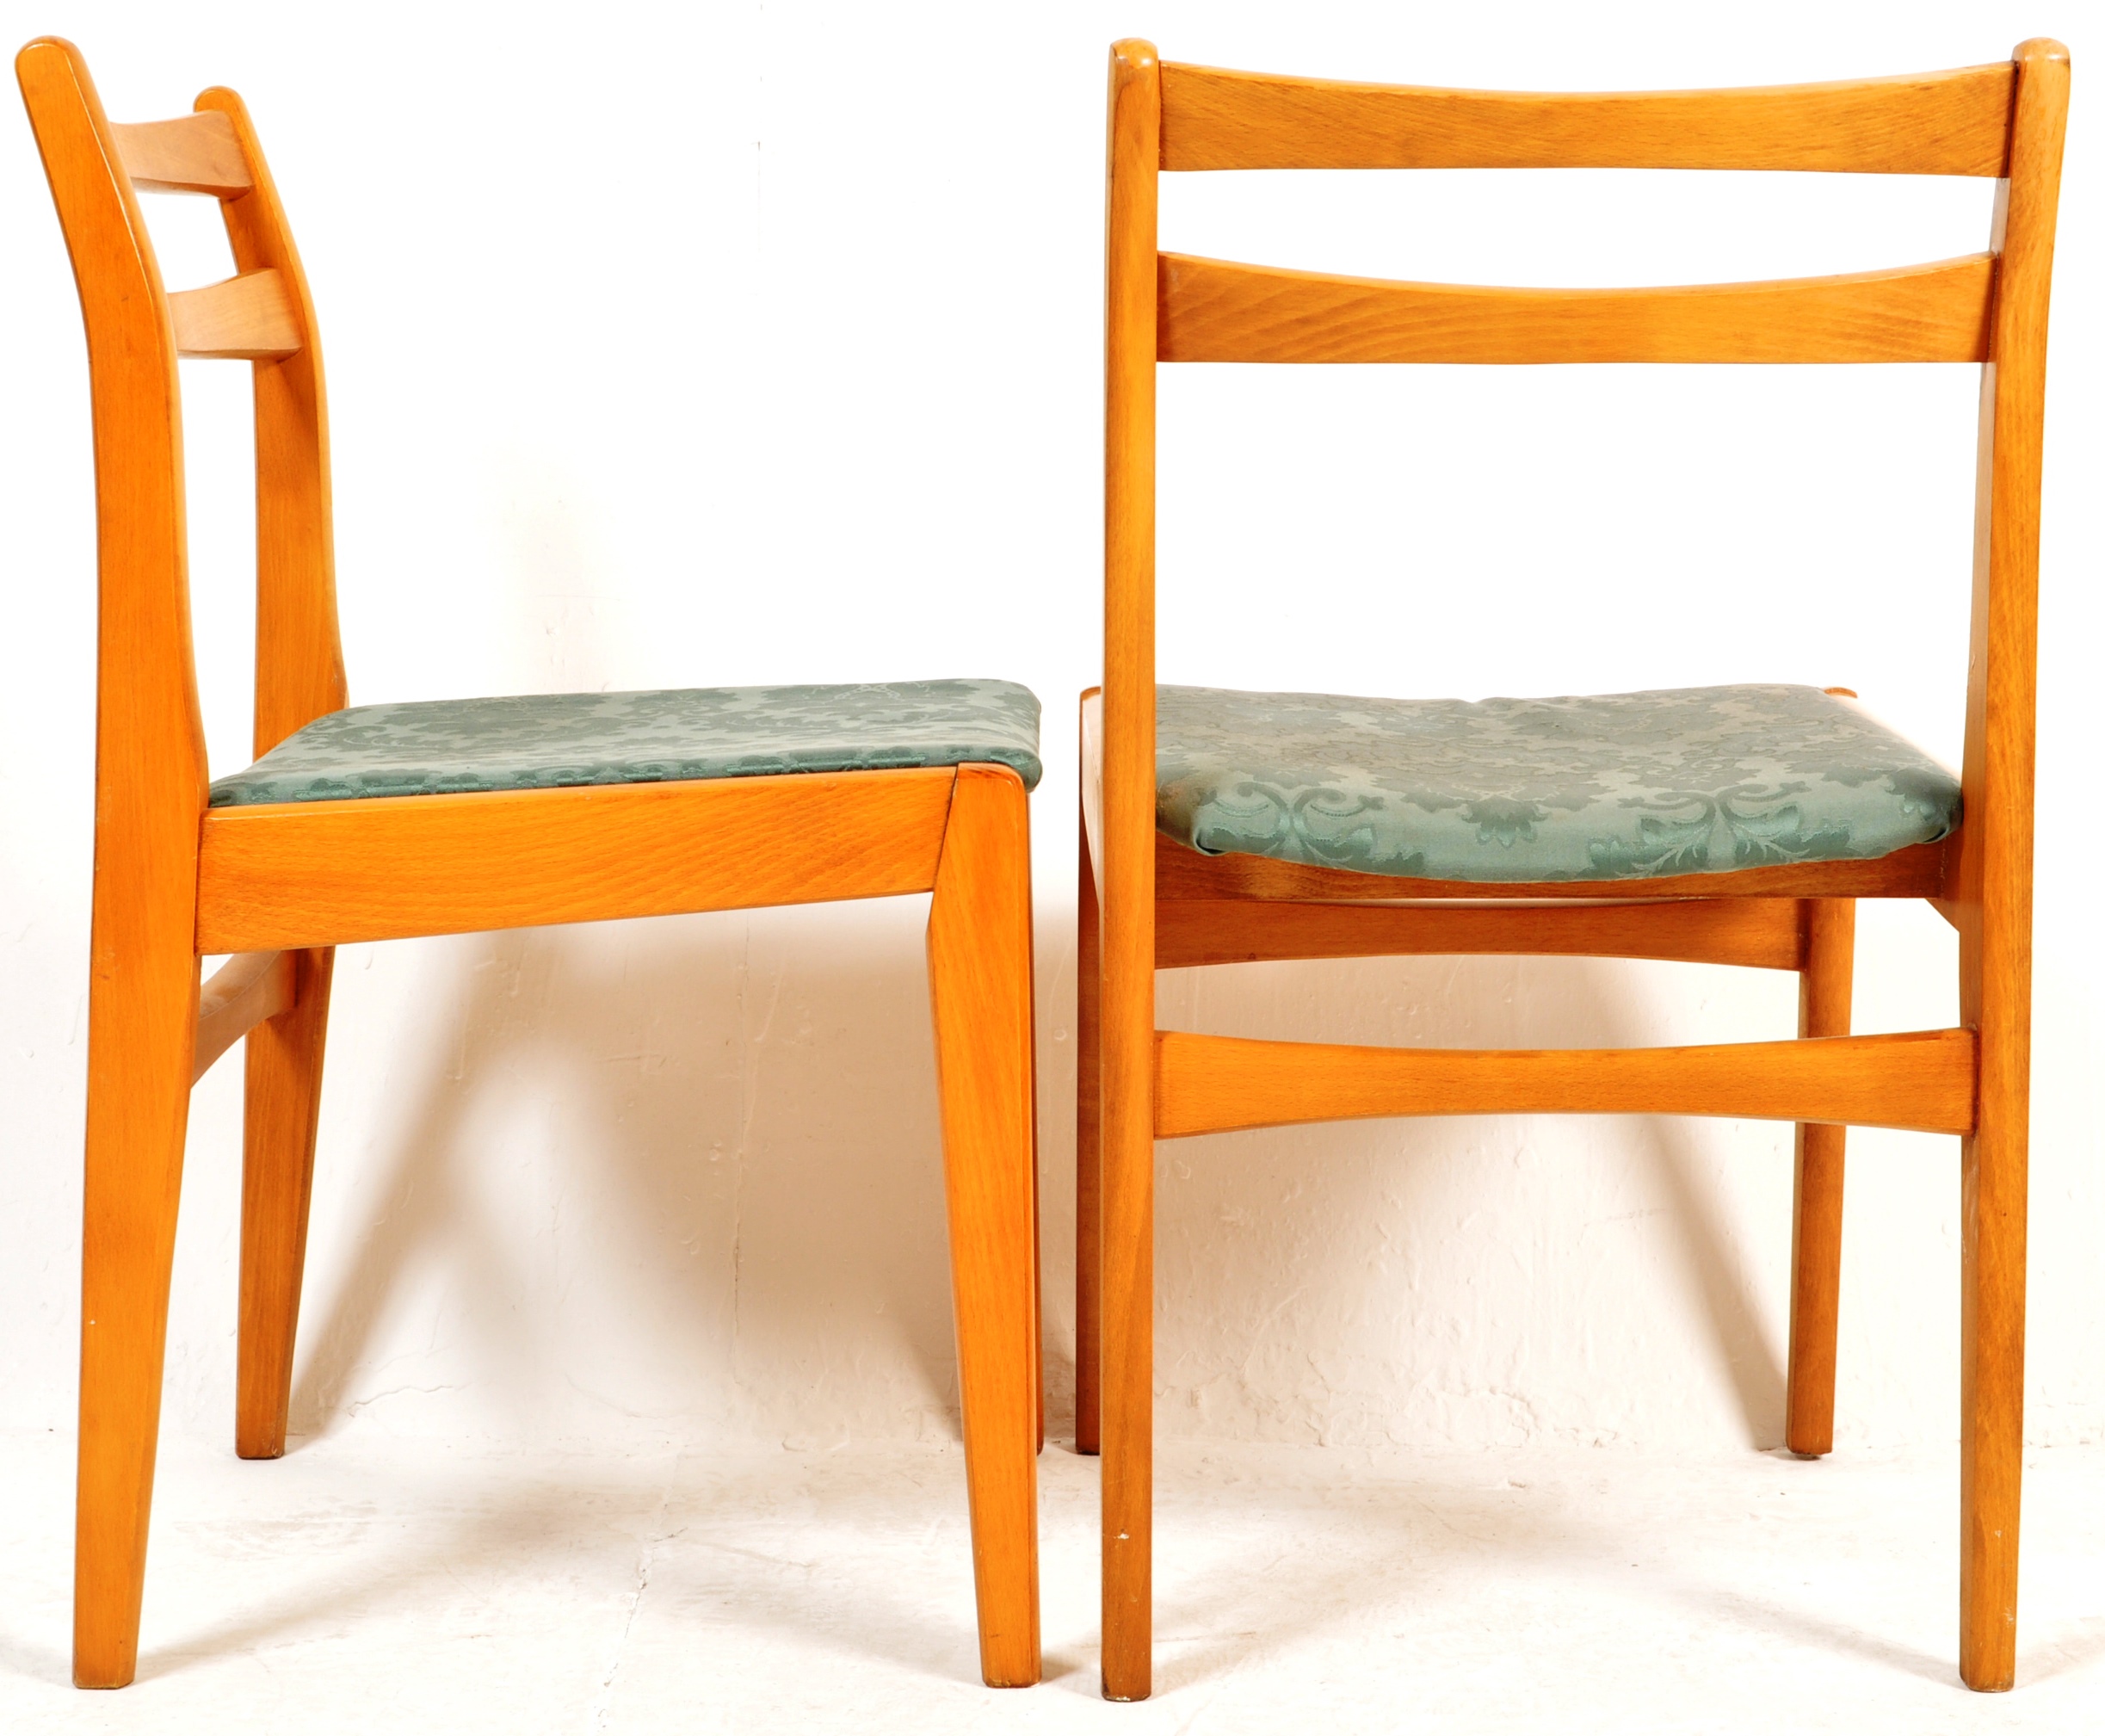 SET OF FOUR VINTAGE MID 20TH CENTURY DINING CHAIRS - Image 6 of 7